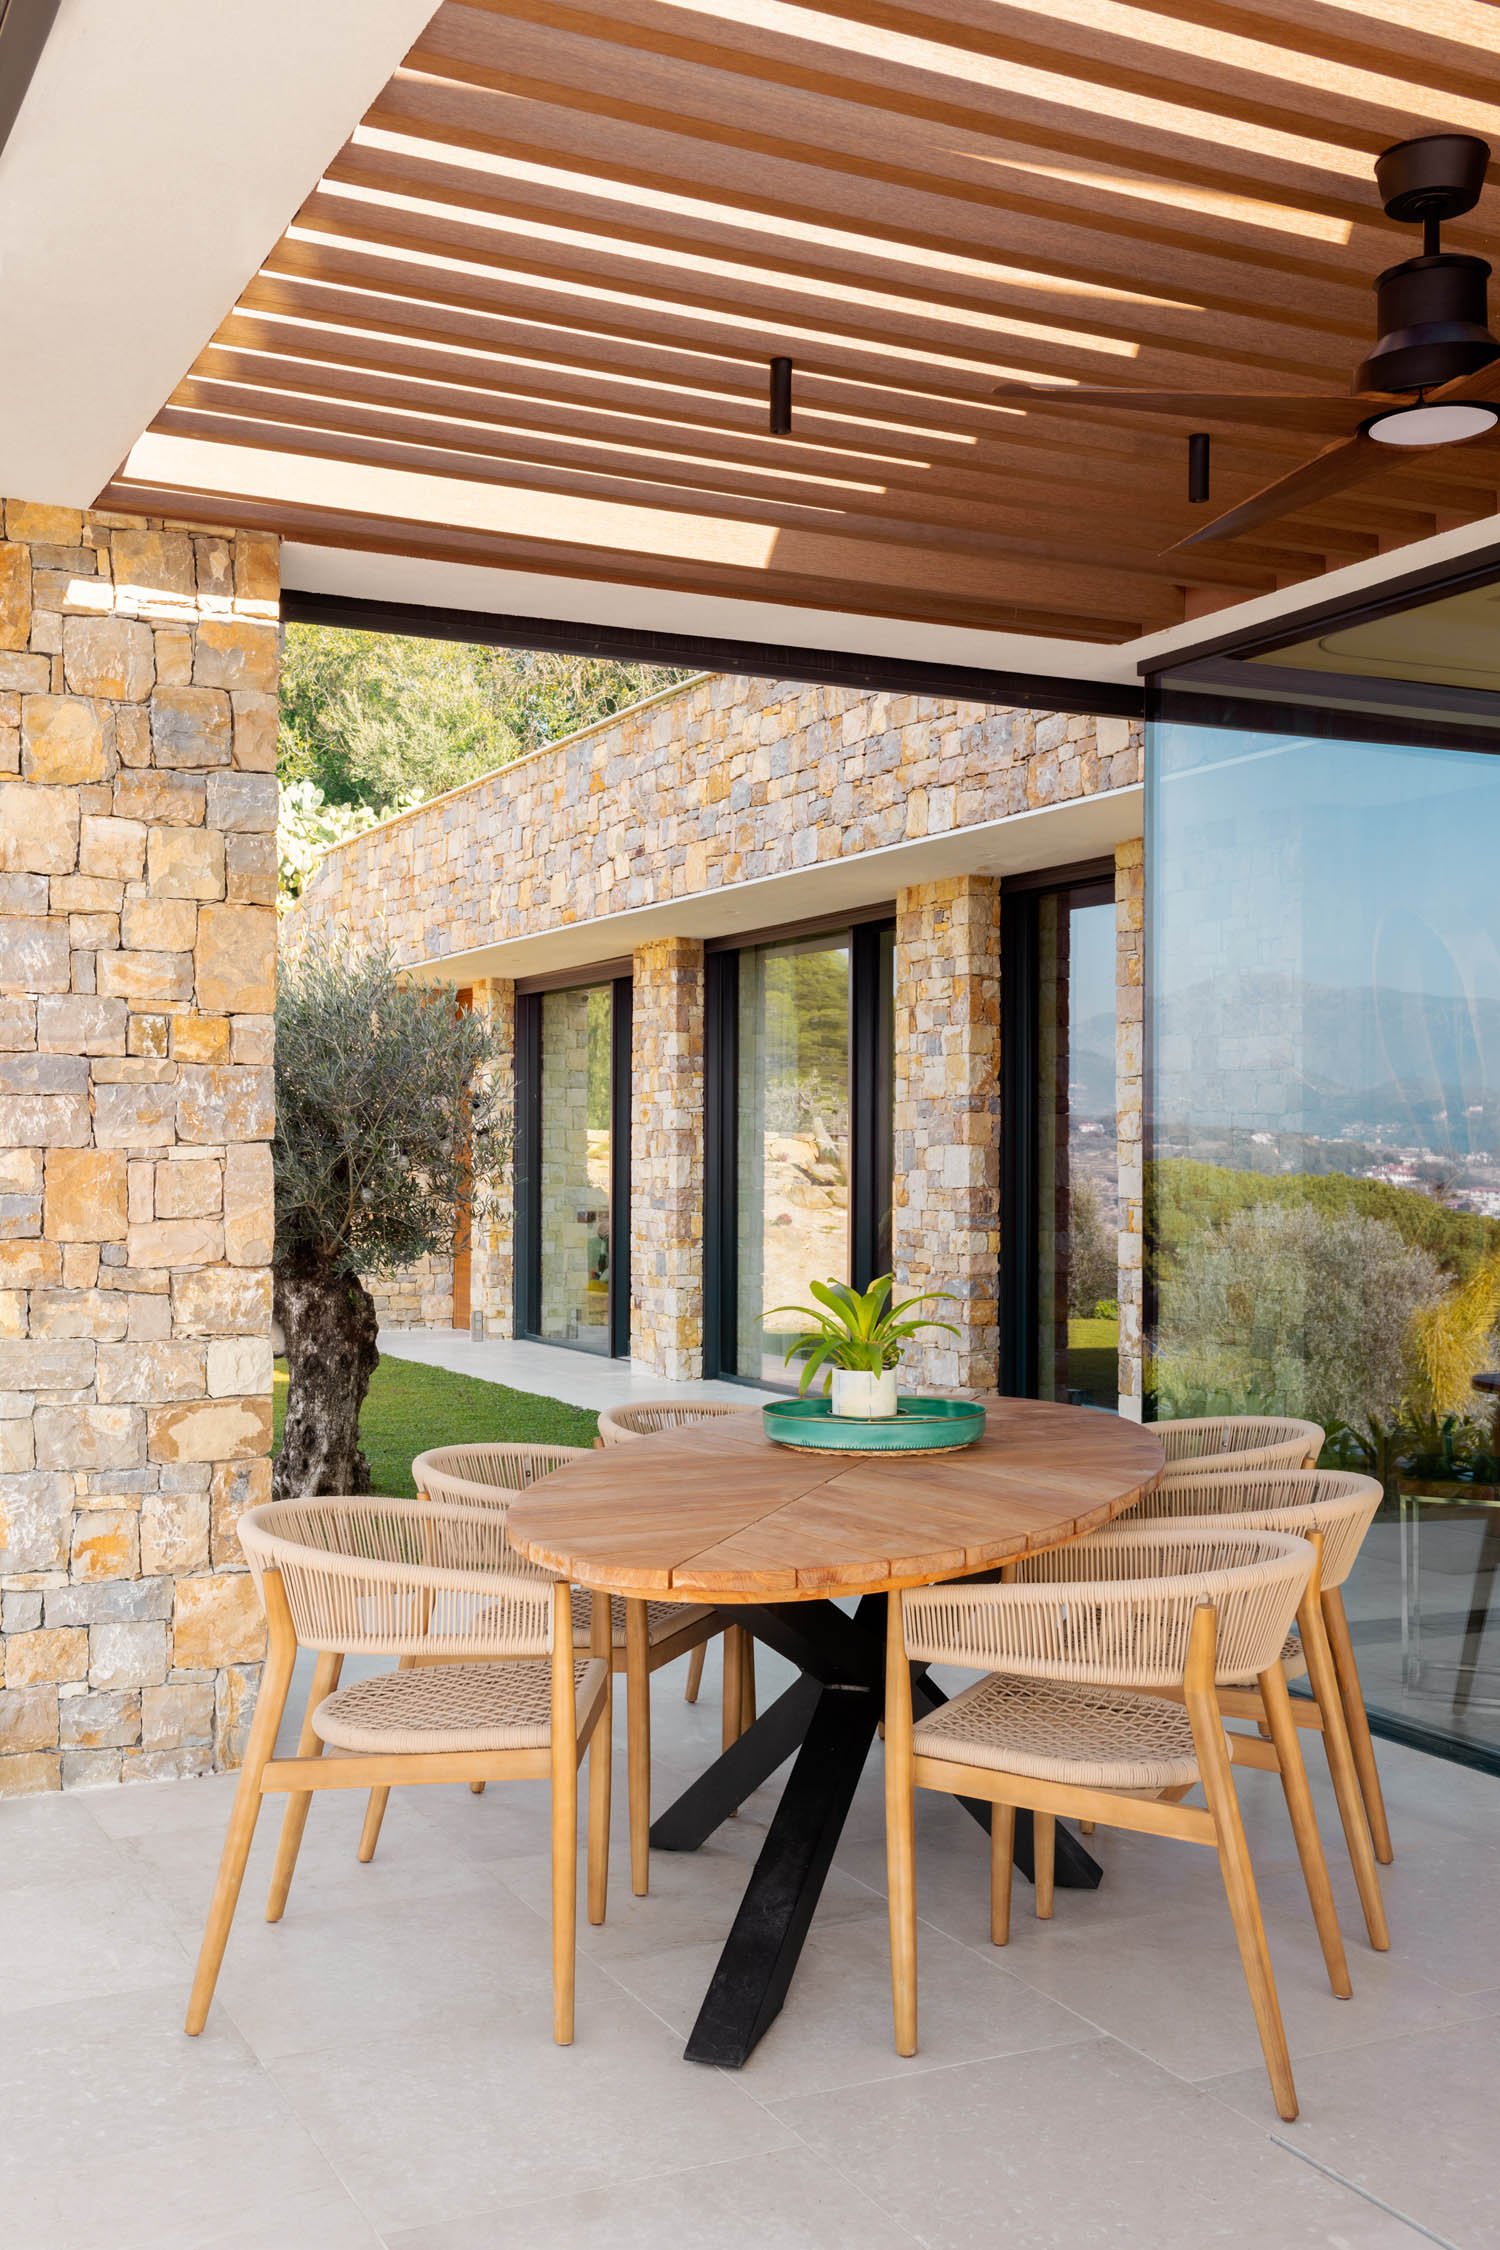 The patio, its sunshading elements and the terraces function as a mediating filter between inside and outside, a comfortable space for outside dining and a lounge area to relax | Anna Positano